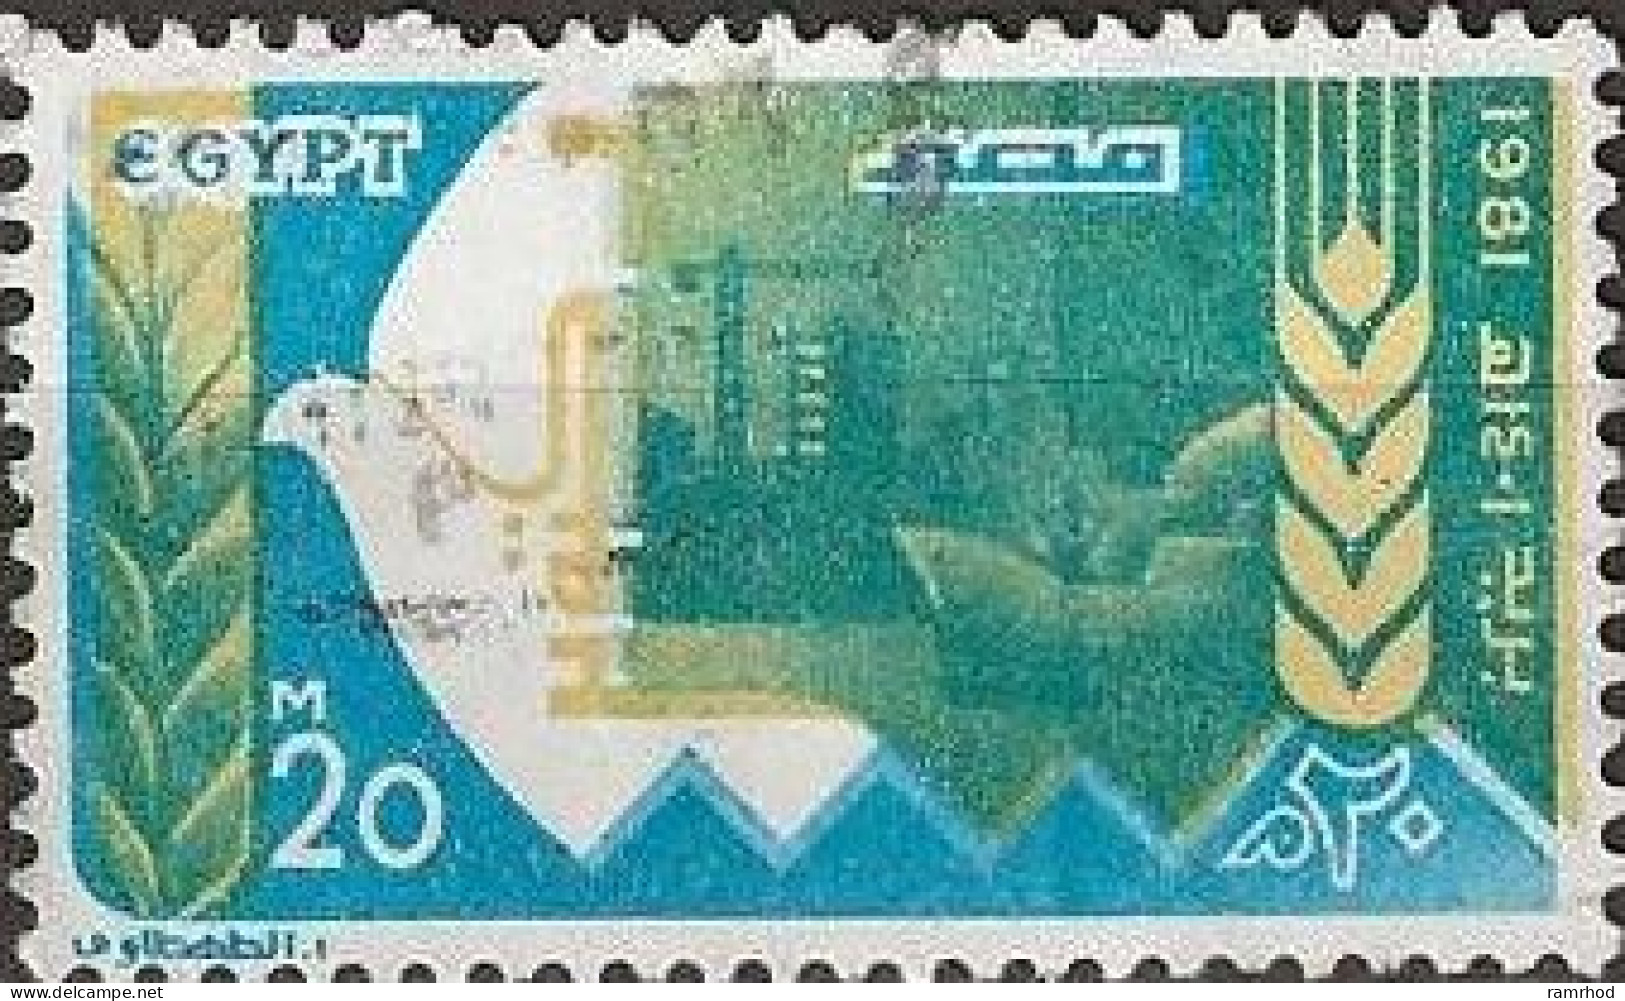 EGYPT 1981 Eighth Anniversary Of Suez Crossing - 20m - Olive, Dove, Canal And Wheat FU - Gebruikt